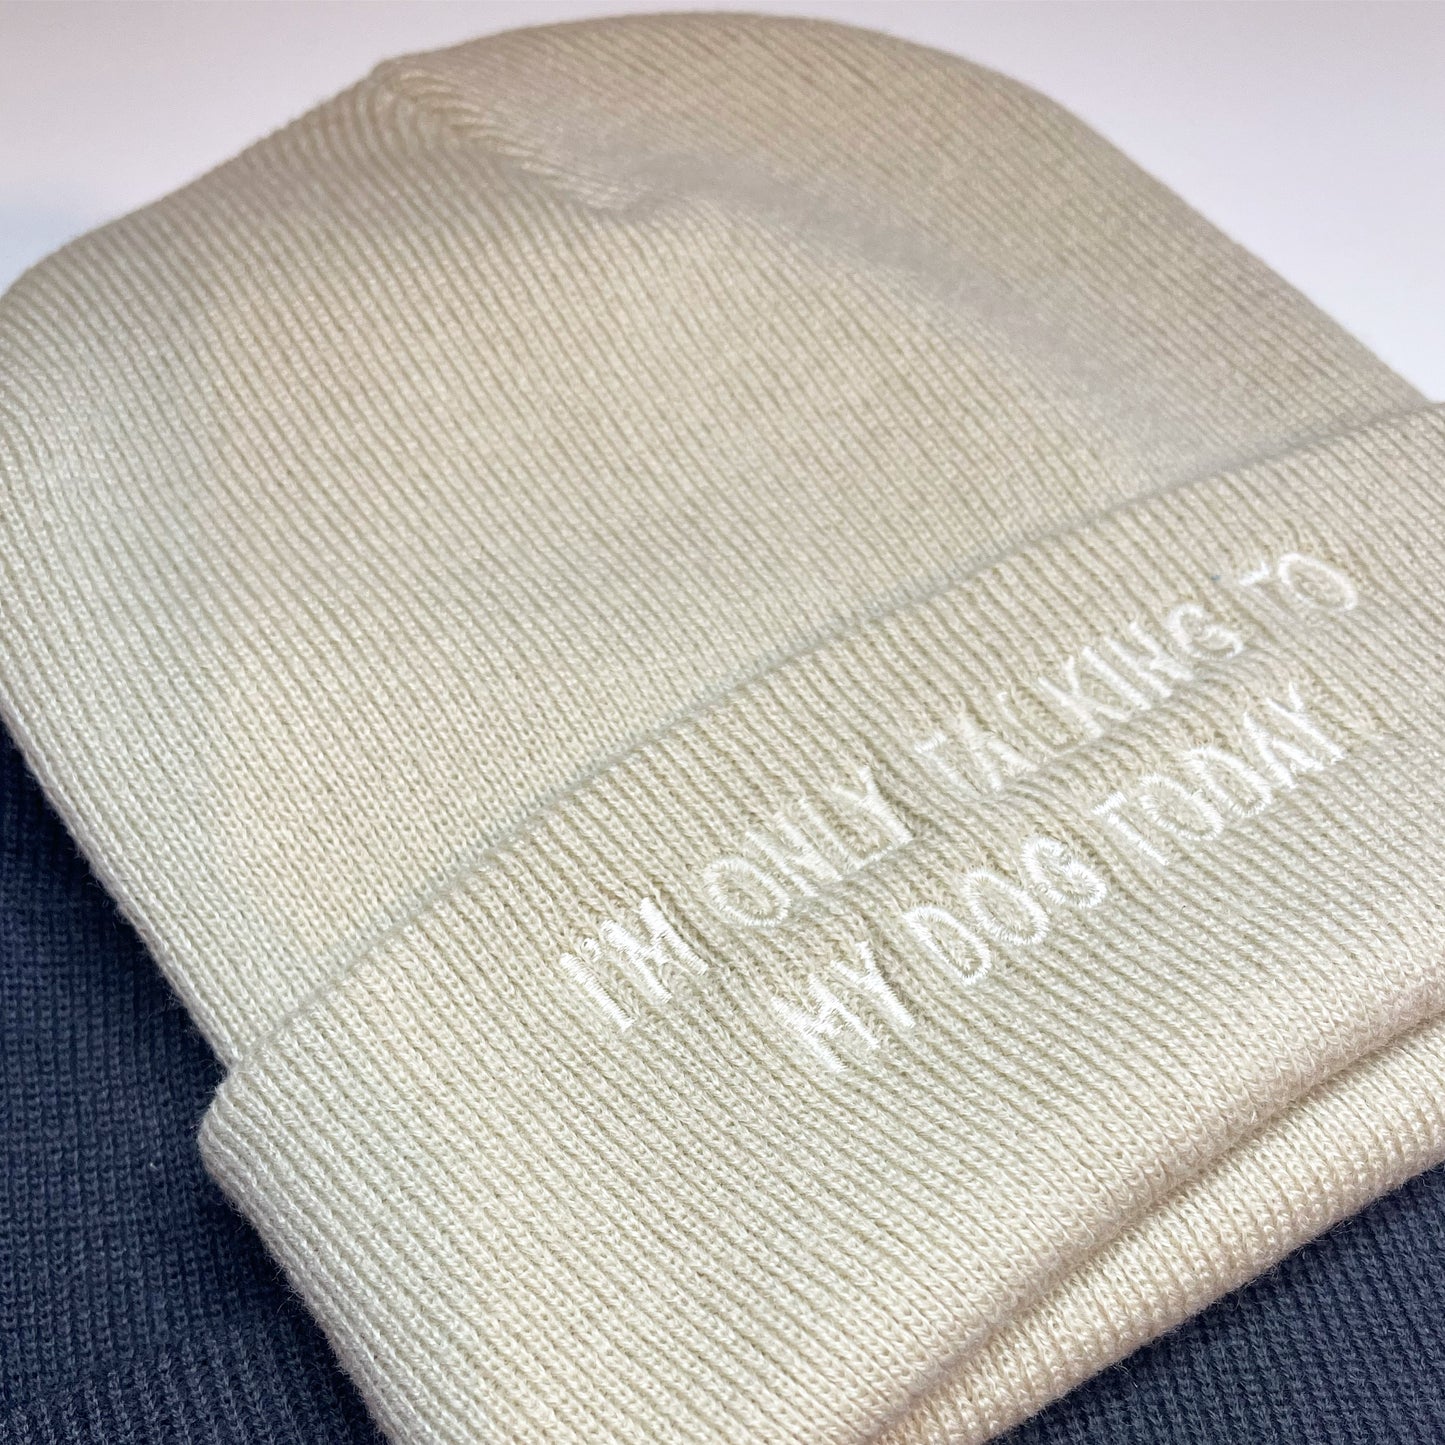 Embroidered I'm Only Talking To My Dog Today Beanie